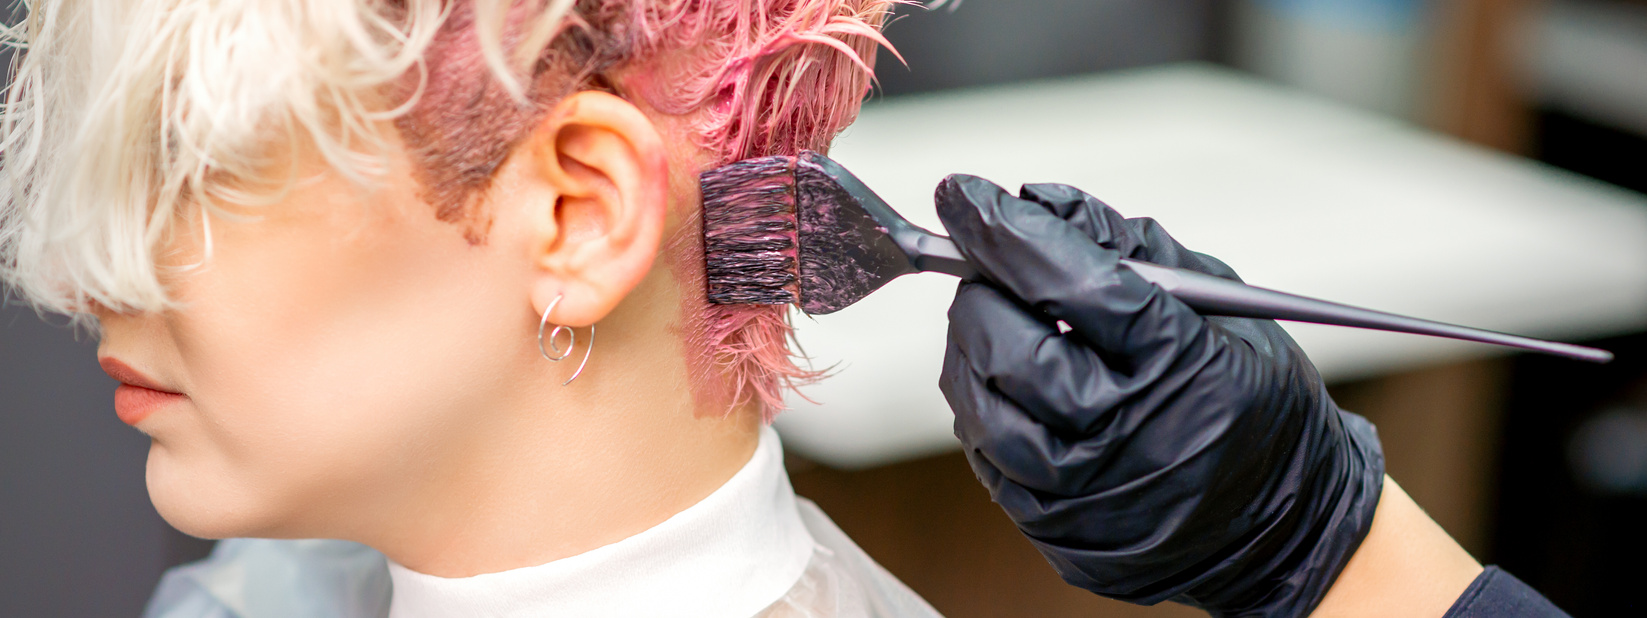 Hairdresser Dyeing Hair in Pink Color